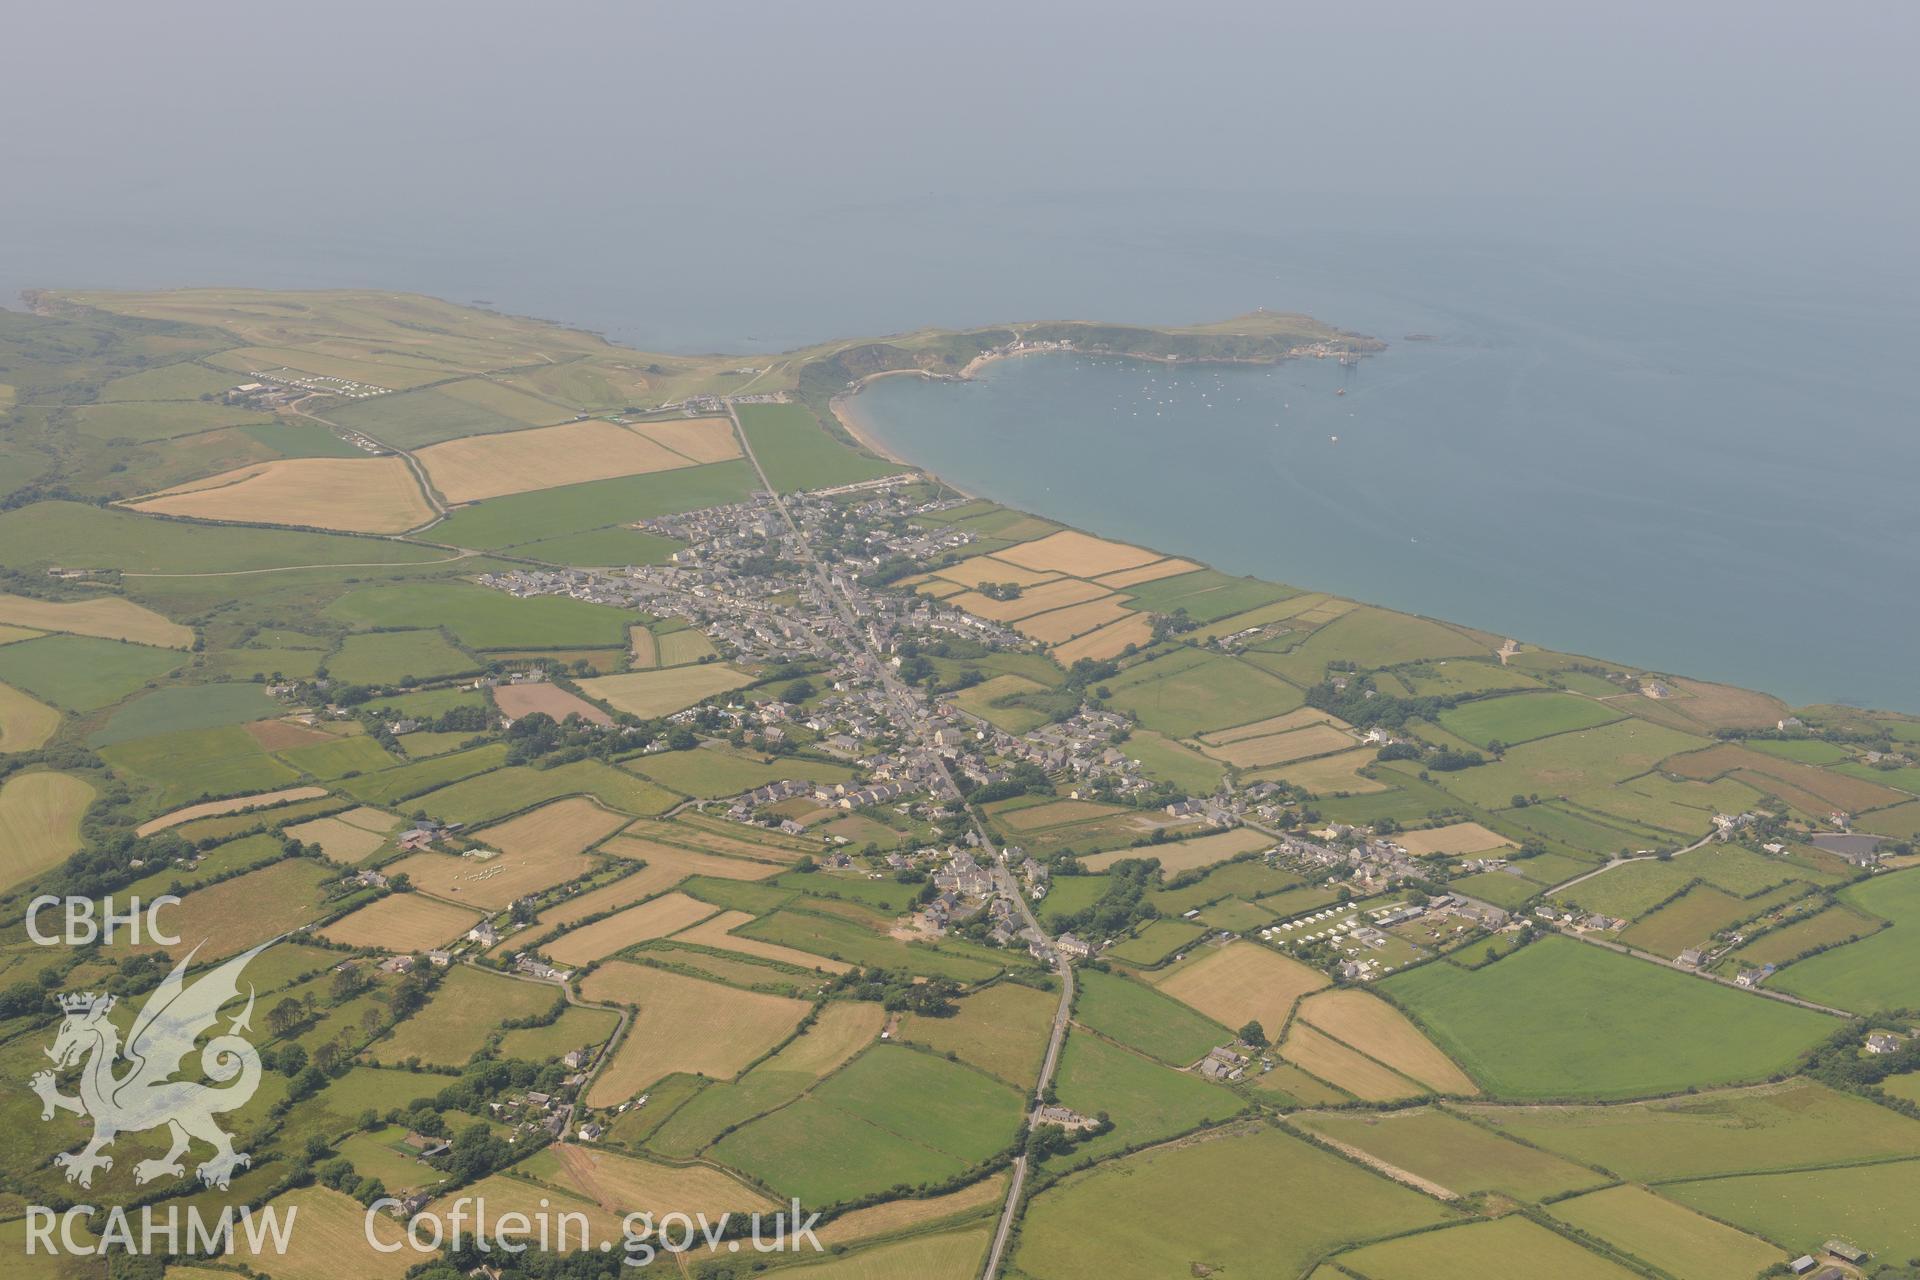 The village of Morfa Nefyn, on the northern coast of the Lleyn Peninsula. Oblique aerial photograph taken during the Royal Commission?s programme of archaeological aerial reconnaissance by Toby Driver on 12th July 2013.